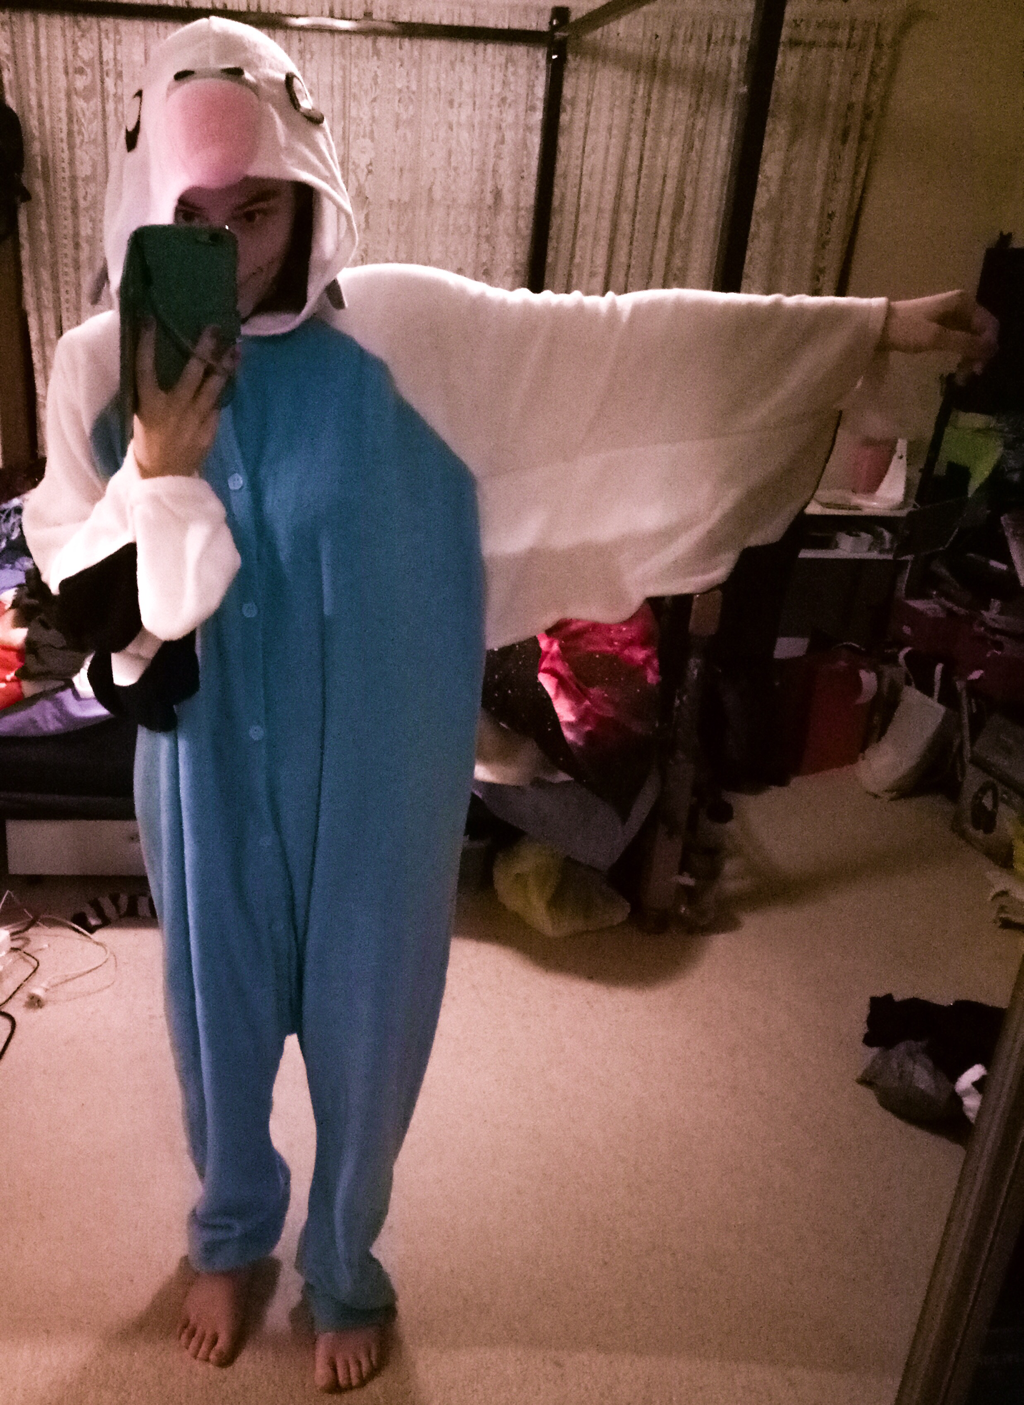 Jessica wearing the blue budgie onesie and taking a selfie